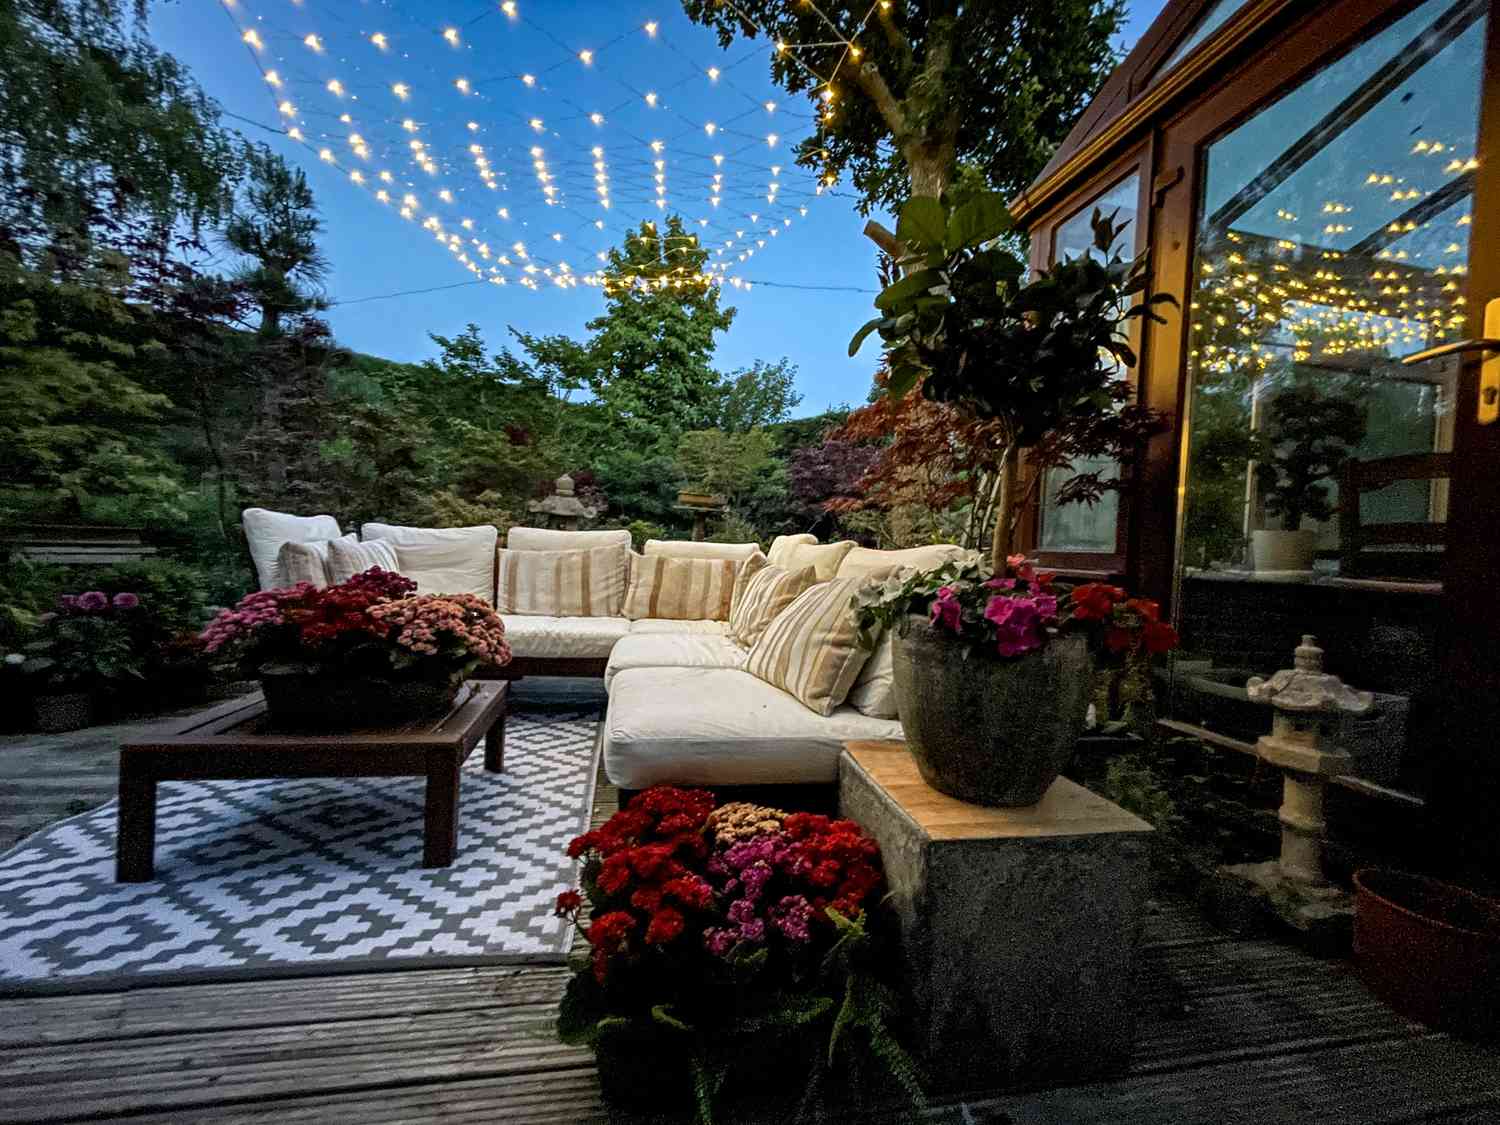 Patio seating with string lights